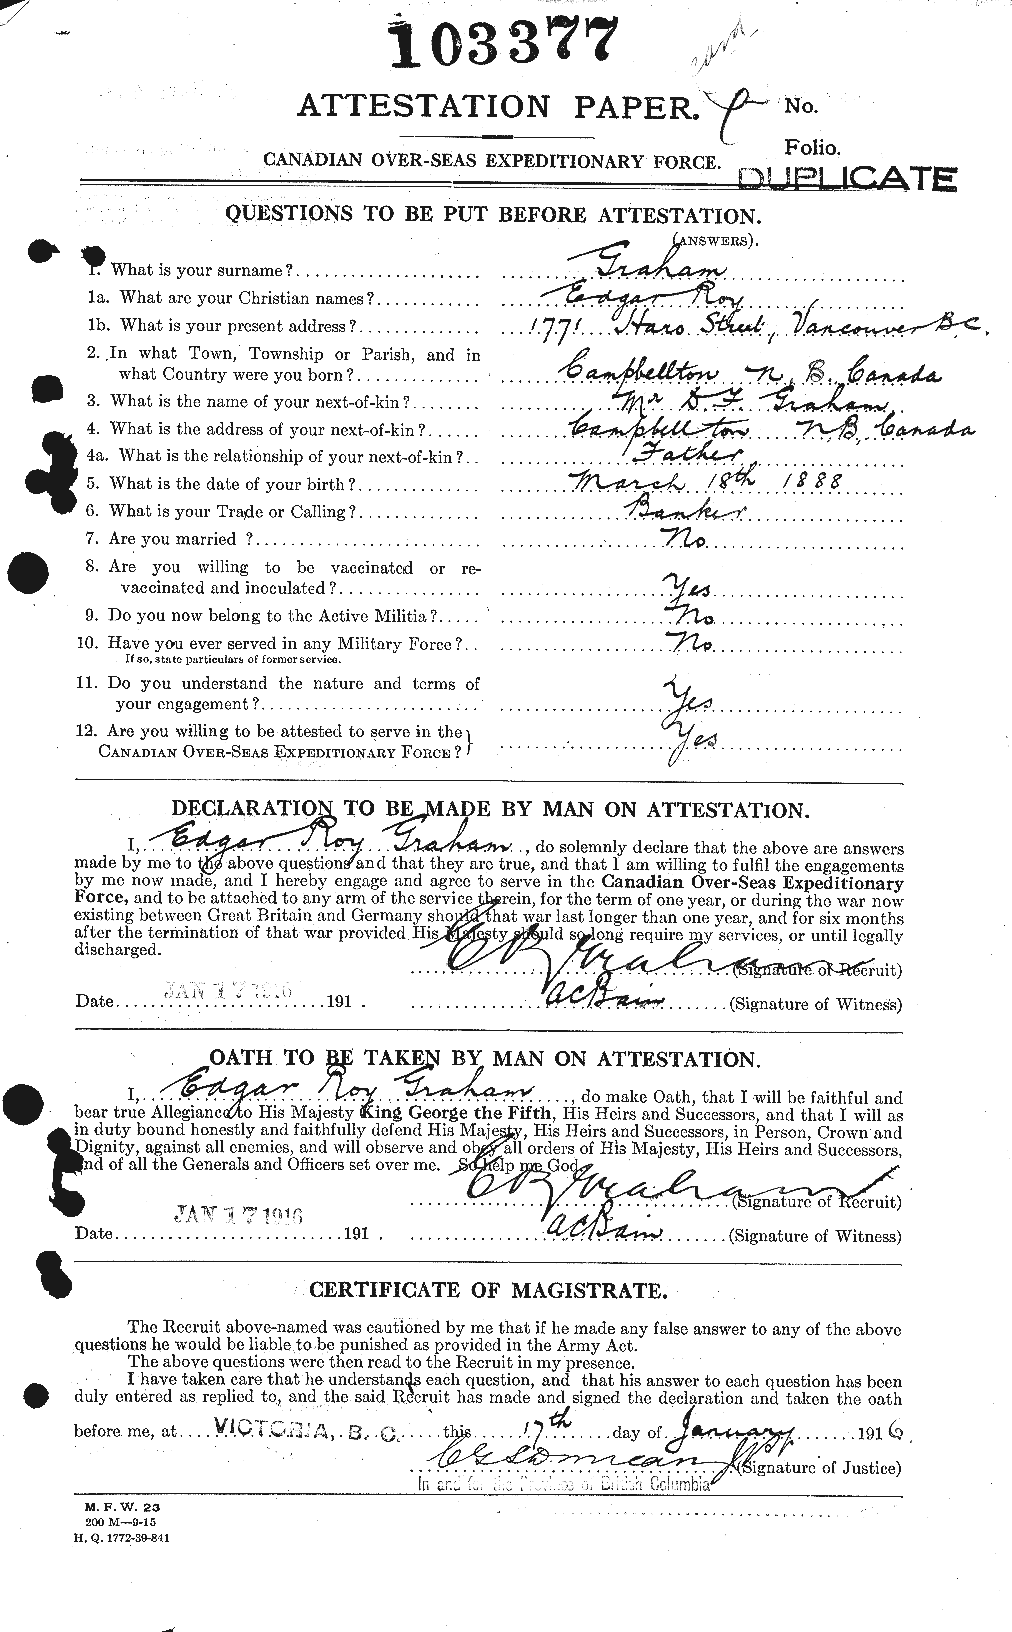 Personnel Records of the First World War - CEF 353862a